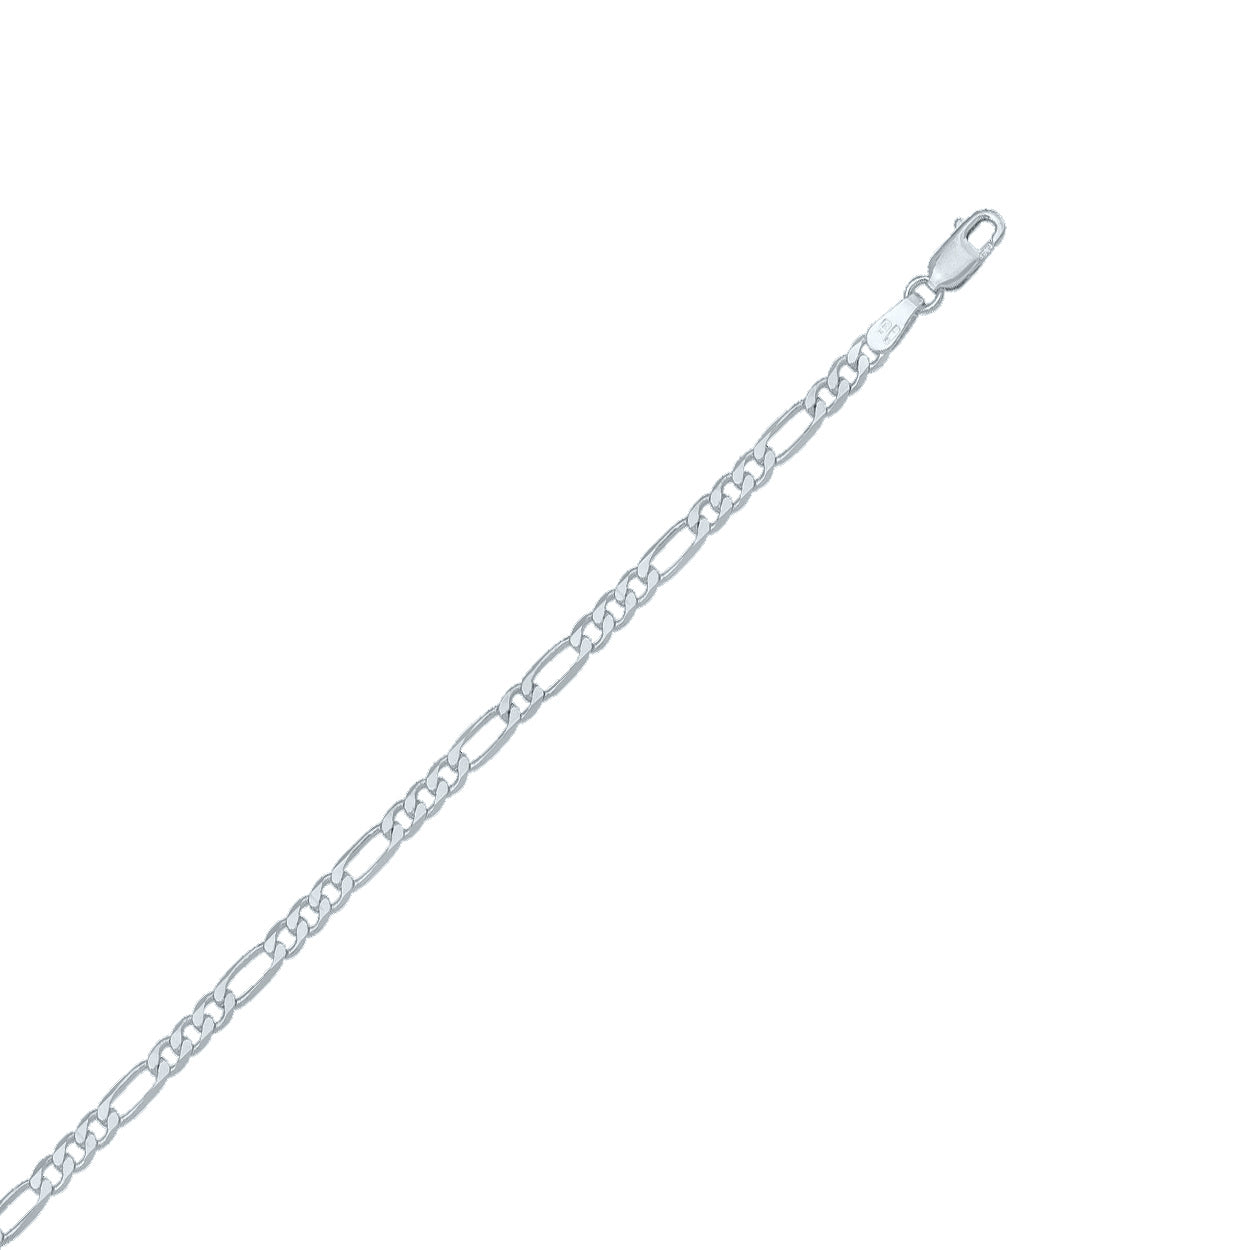 18kt White Gold Figaro Style Bracelet with 3mm Width